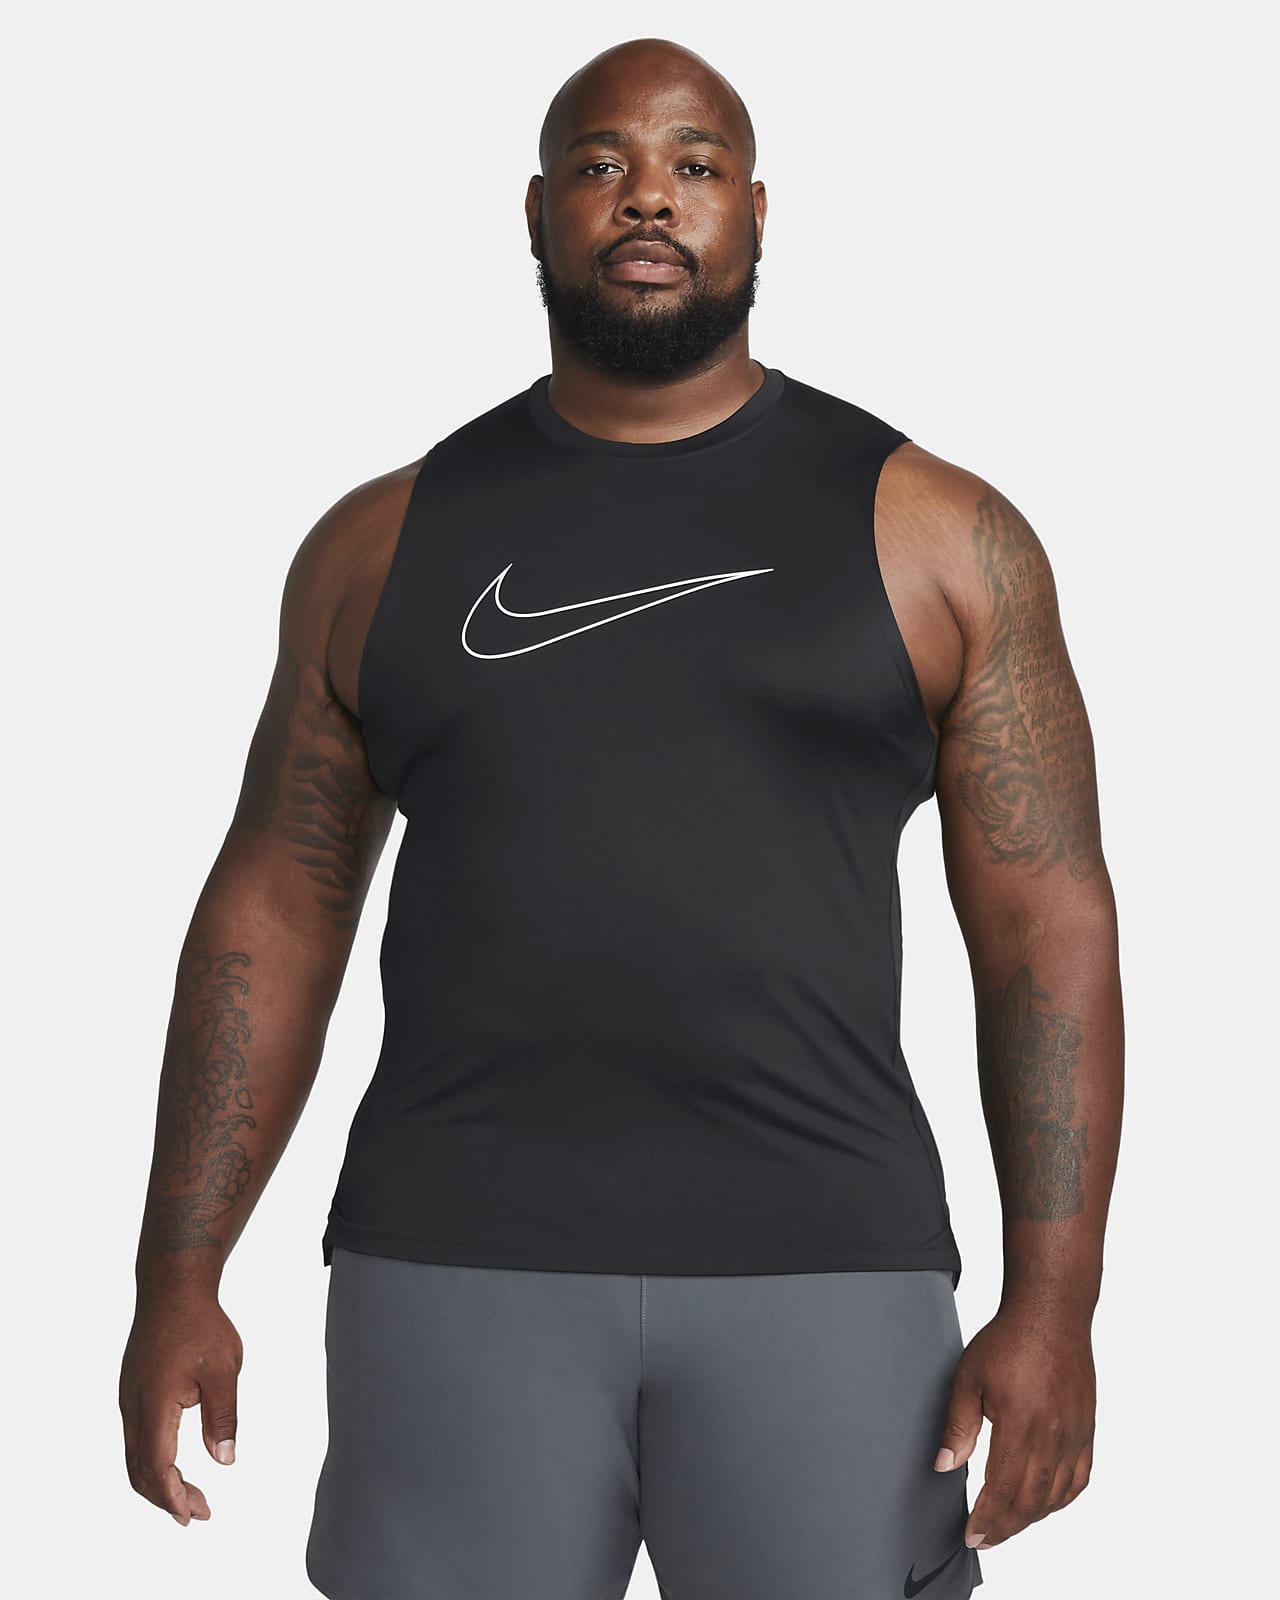 sacred downstairs take a picture Nike Pro Dri-FIT Men's Slim Fit Sleeveless Top. Nike.com